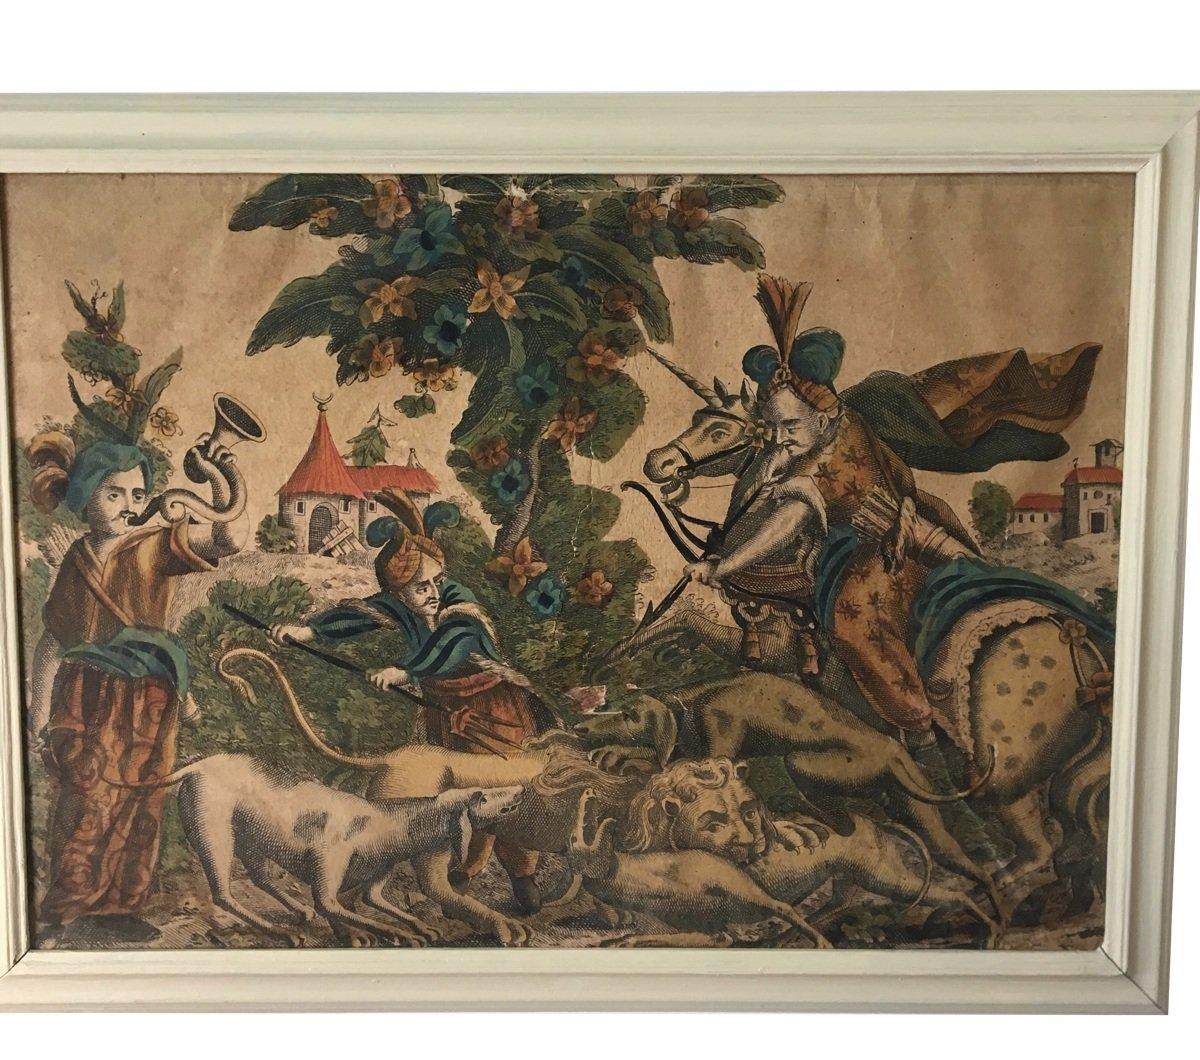 Rare set of four 18th-17th century French copper plate engraved panels, hand-colored with chinoiserie and pastoral and courtly love motifs, circa 1720 judging style, paper, printing technique. Still under research. The larger panels 46 ¼ H. x 22” W.